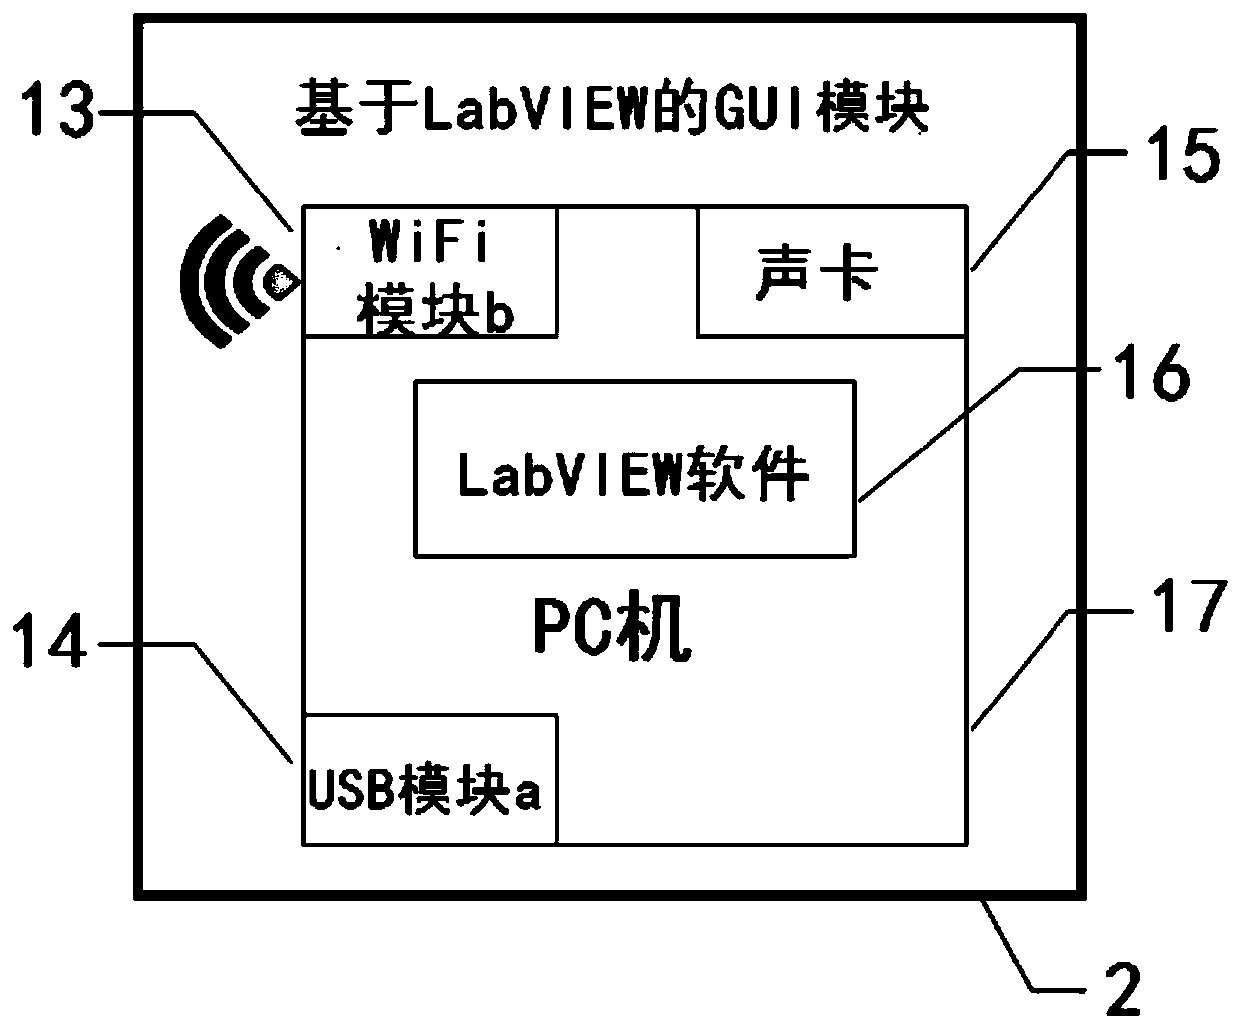 Remote control system based on wifi with microphone and ppt page turning function